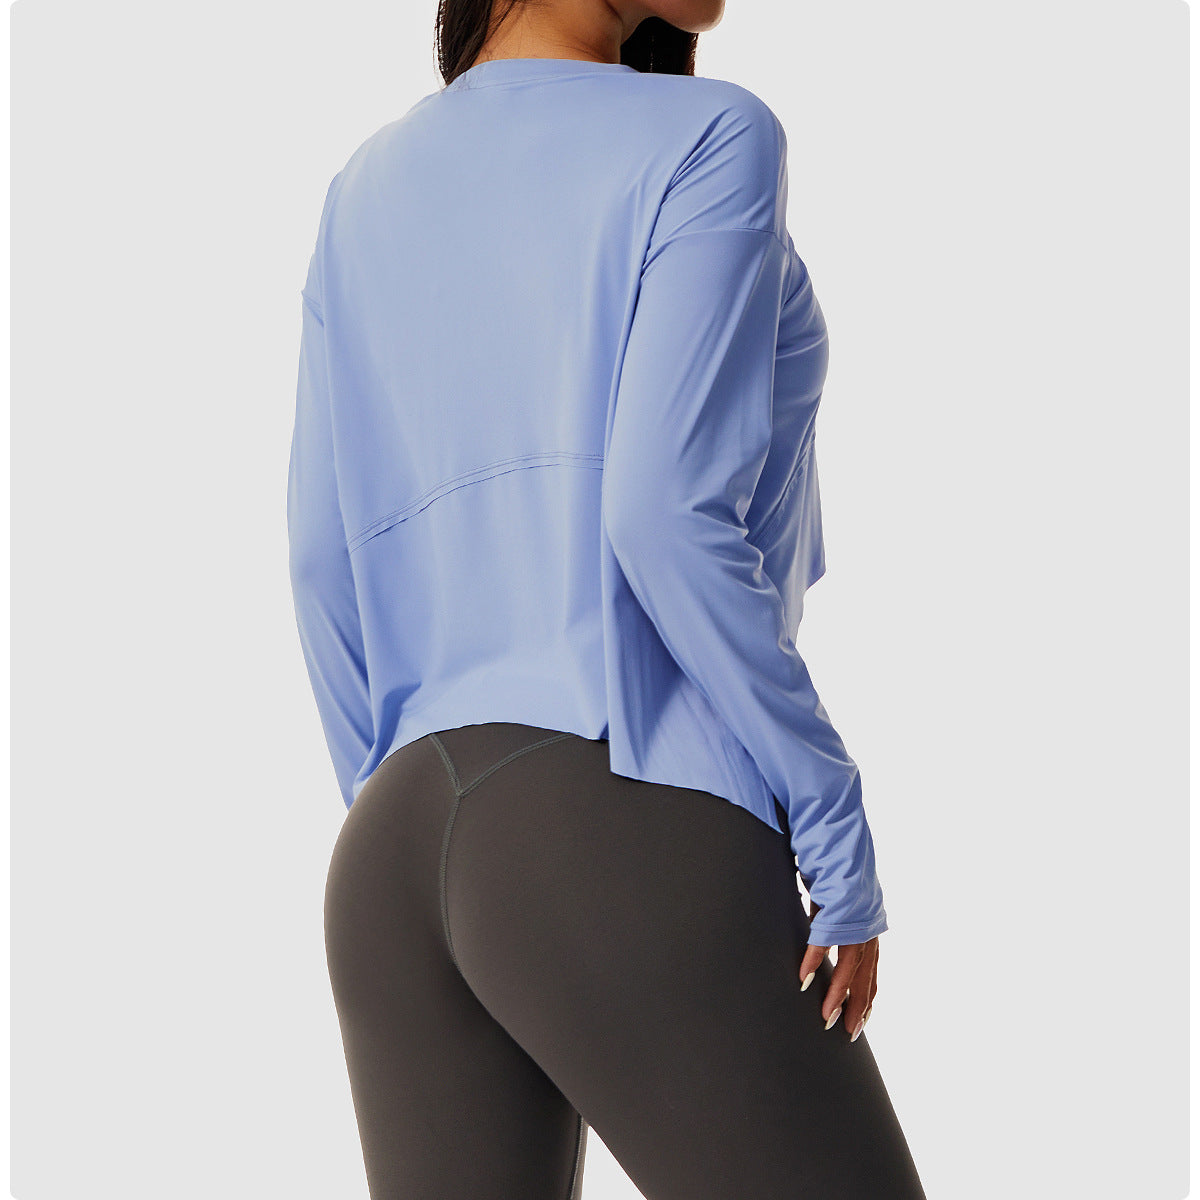 Breathable quick dry training long sleeve